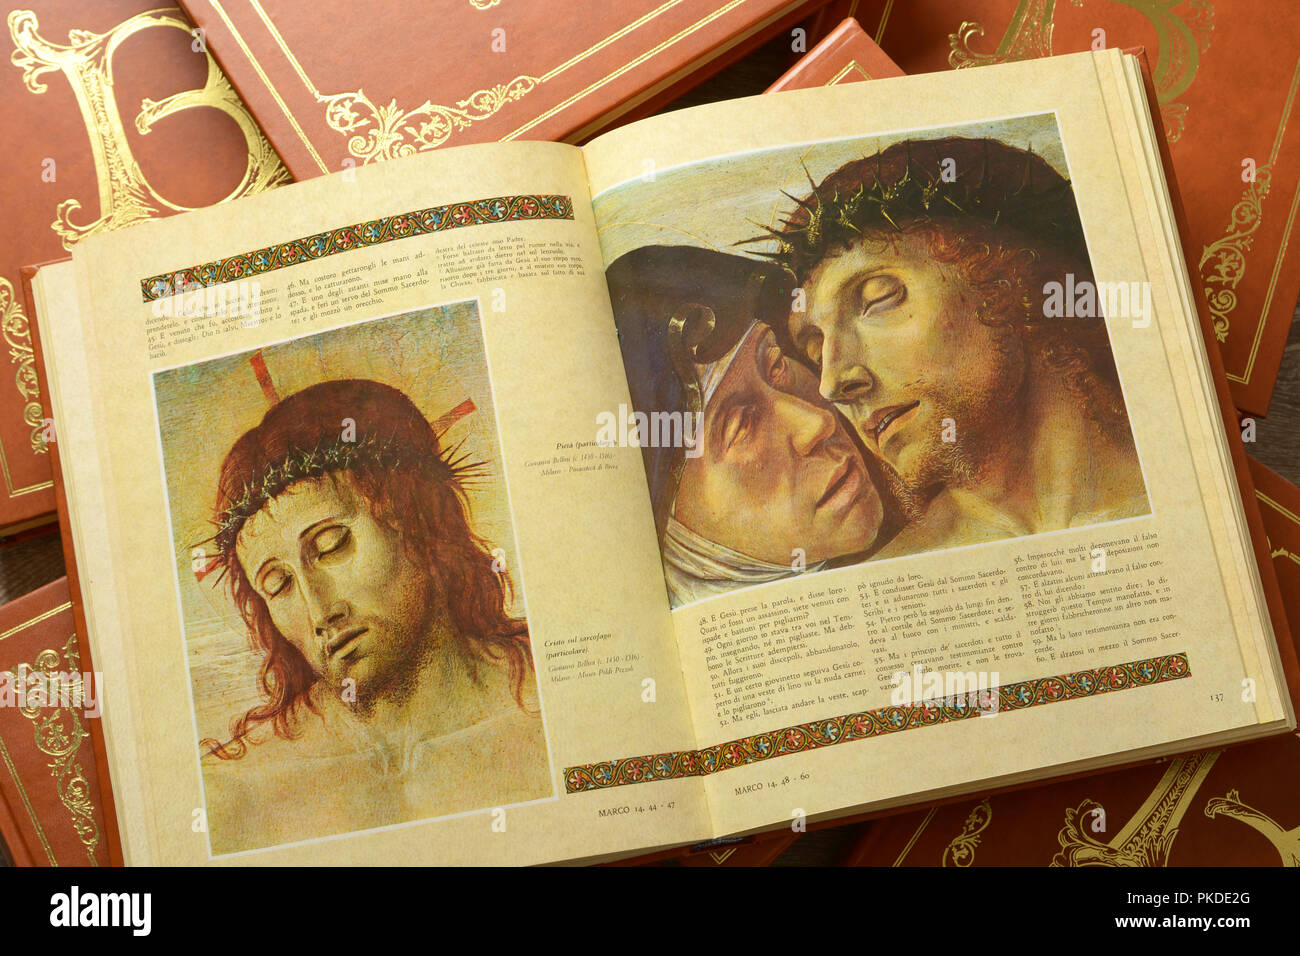 the bible - new testament - old testament - bound in leather with illustrations - closeup - for editorial use only Stock Photo